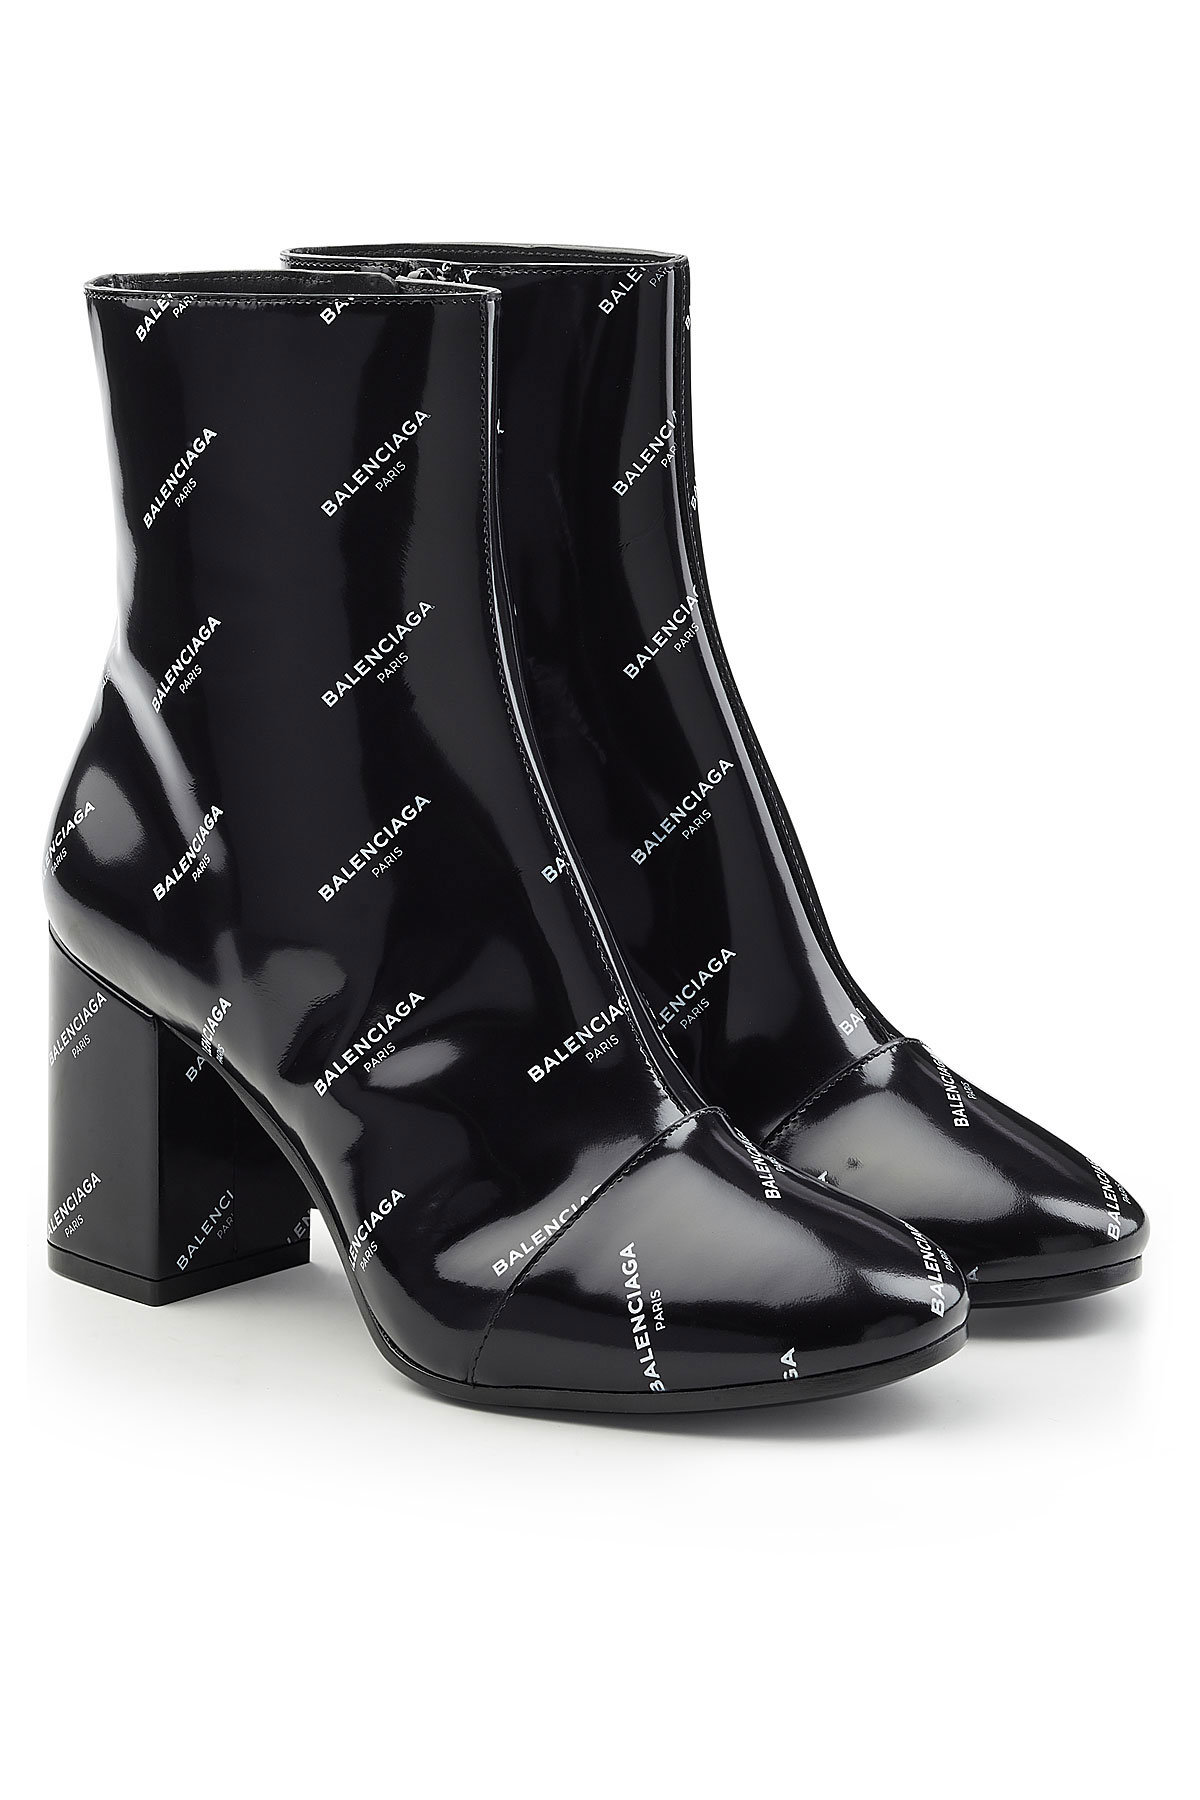 Balenciaga - Printed Patent Leather Ankle Boots